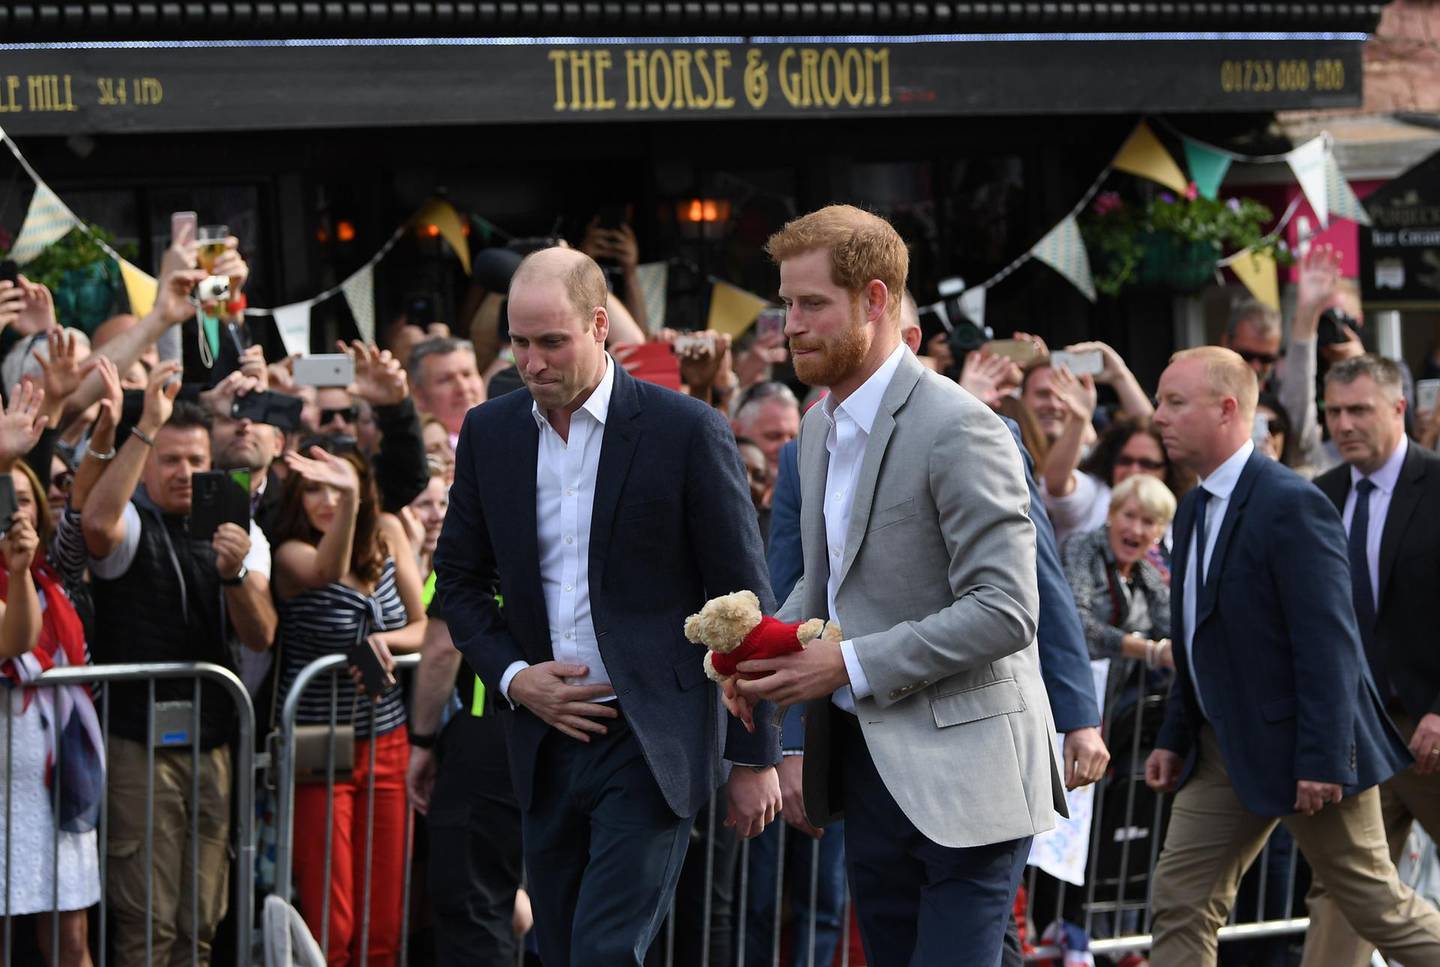 WINDSOR, ENGLAND - MAY 18:  (R-L) Prince Harry and  Prince William, Duke of Cambridge embark on a walkabout ahead of the royal wedding of Prince Harry and Meghan Markle on May 18, 2018 in Windsor, England.  (Photo by Shaun Botterill/Getty Images)